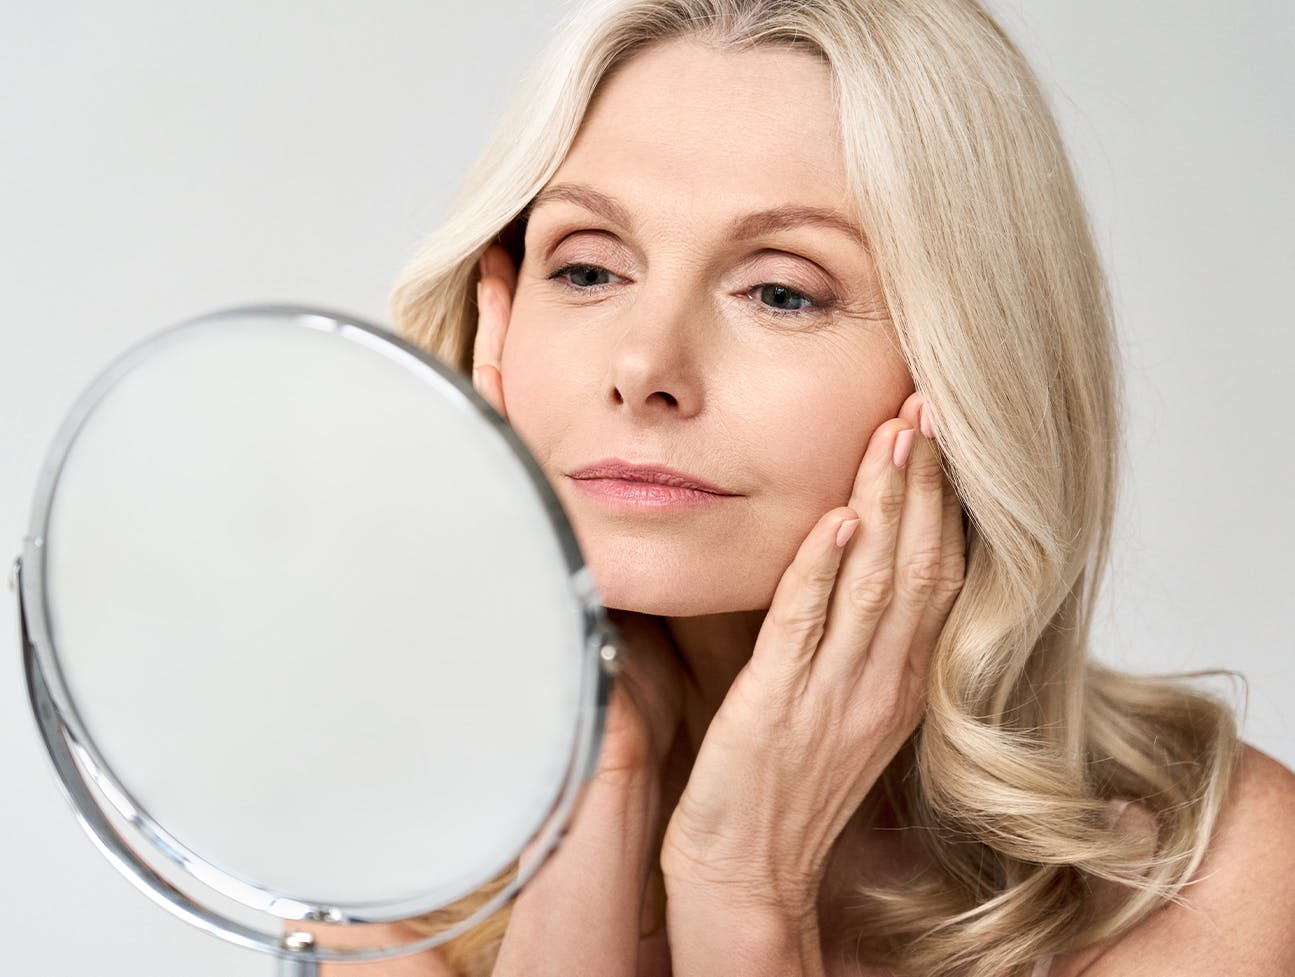 Middle aged woman examining her face in a mirror.